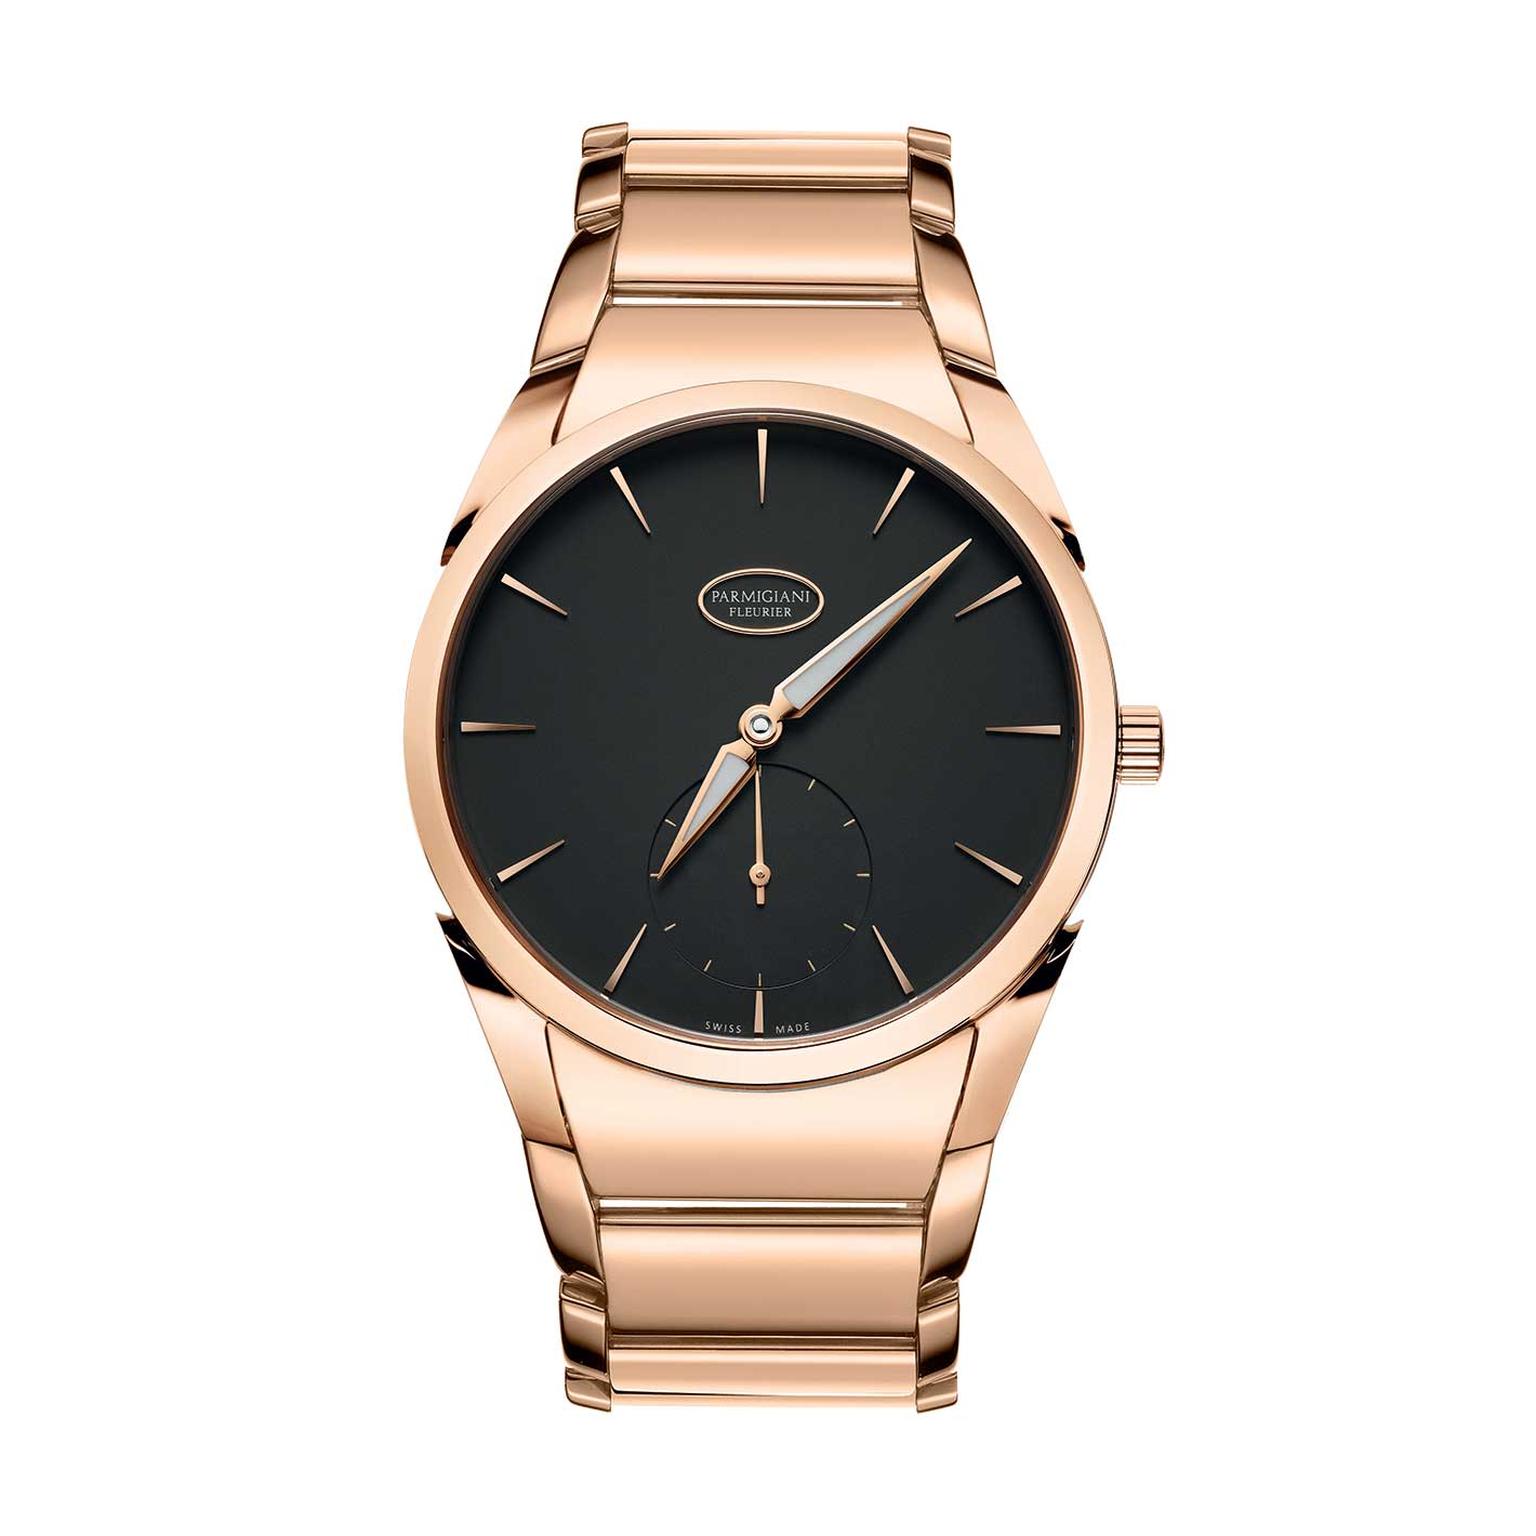 Parmigiani Tonda 1950 watch in rose gold with a graphite dial